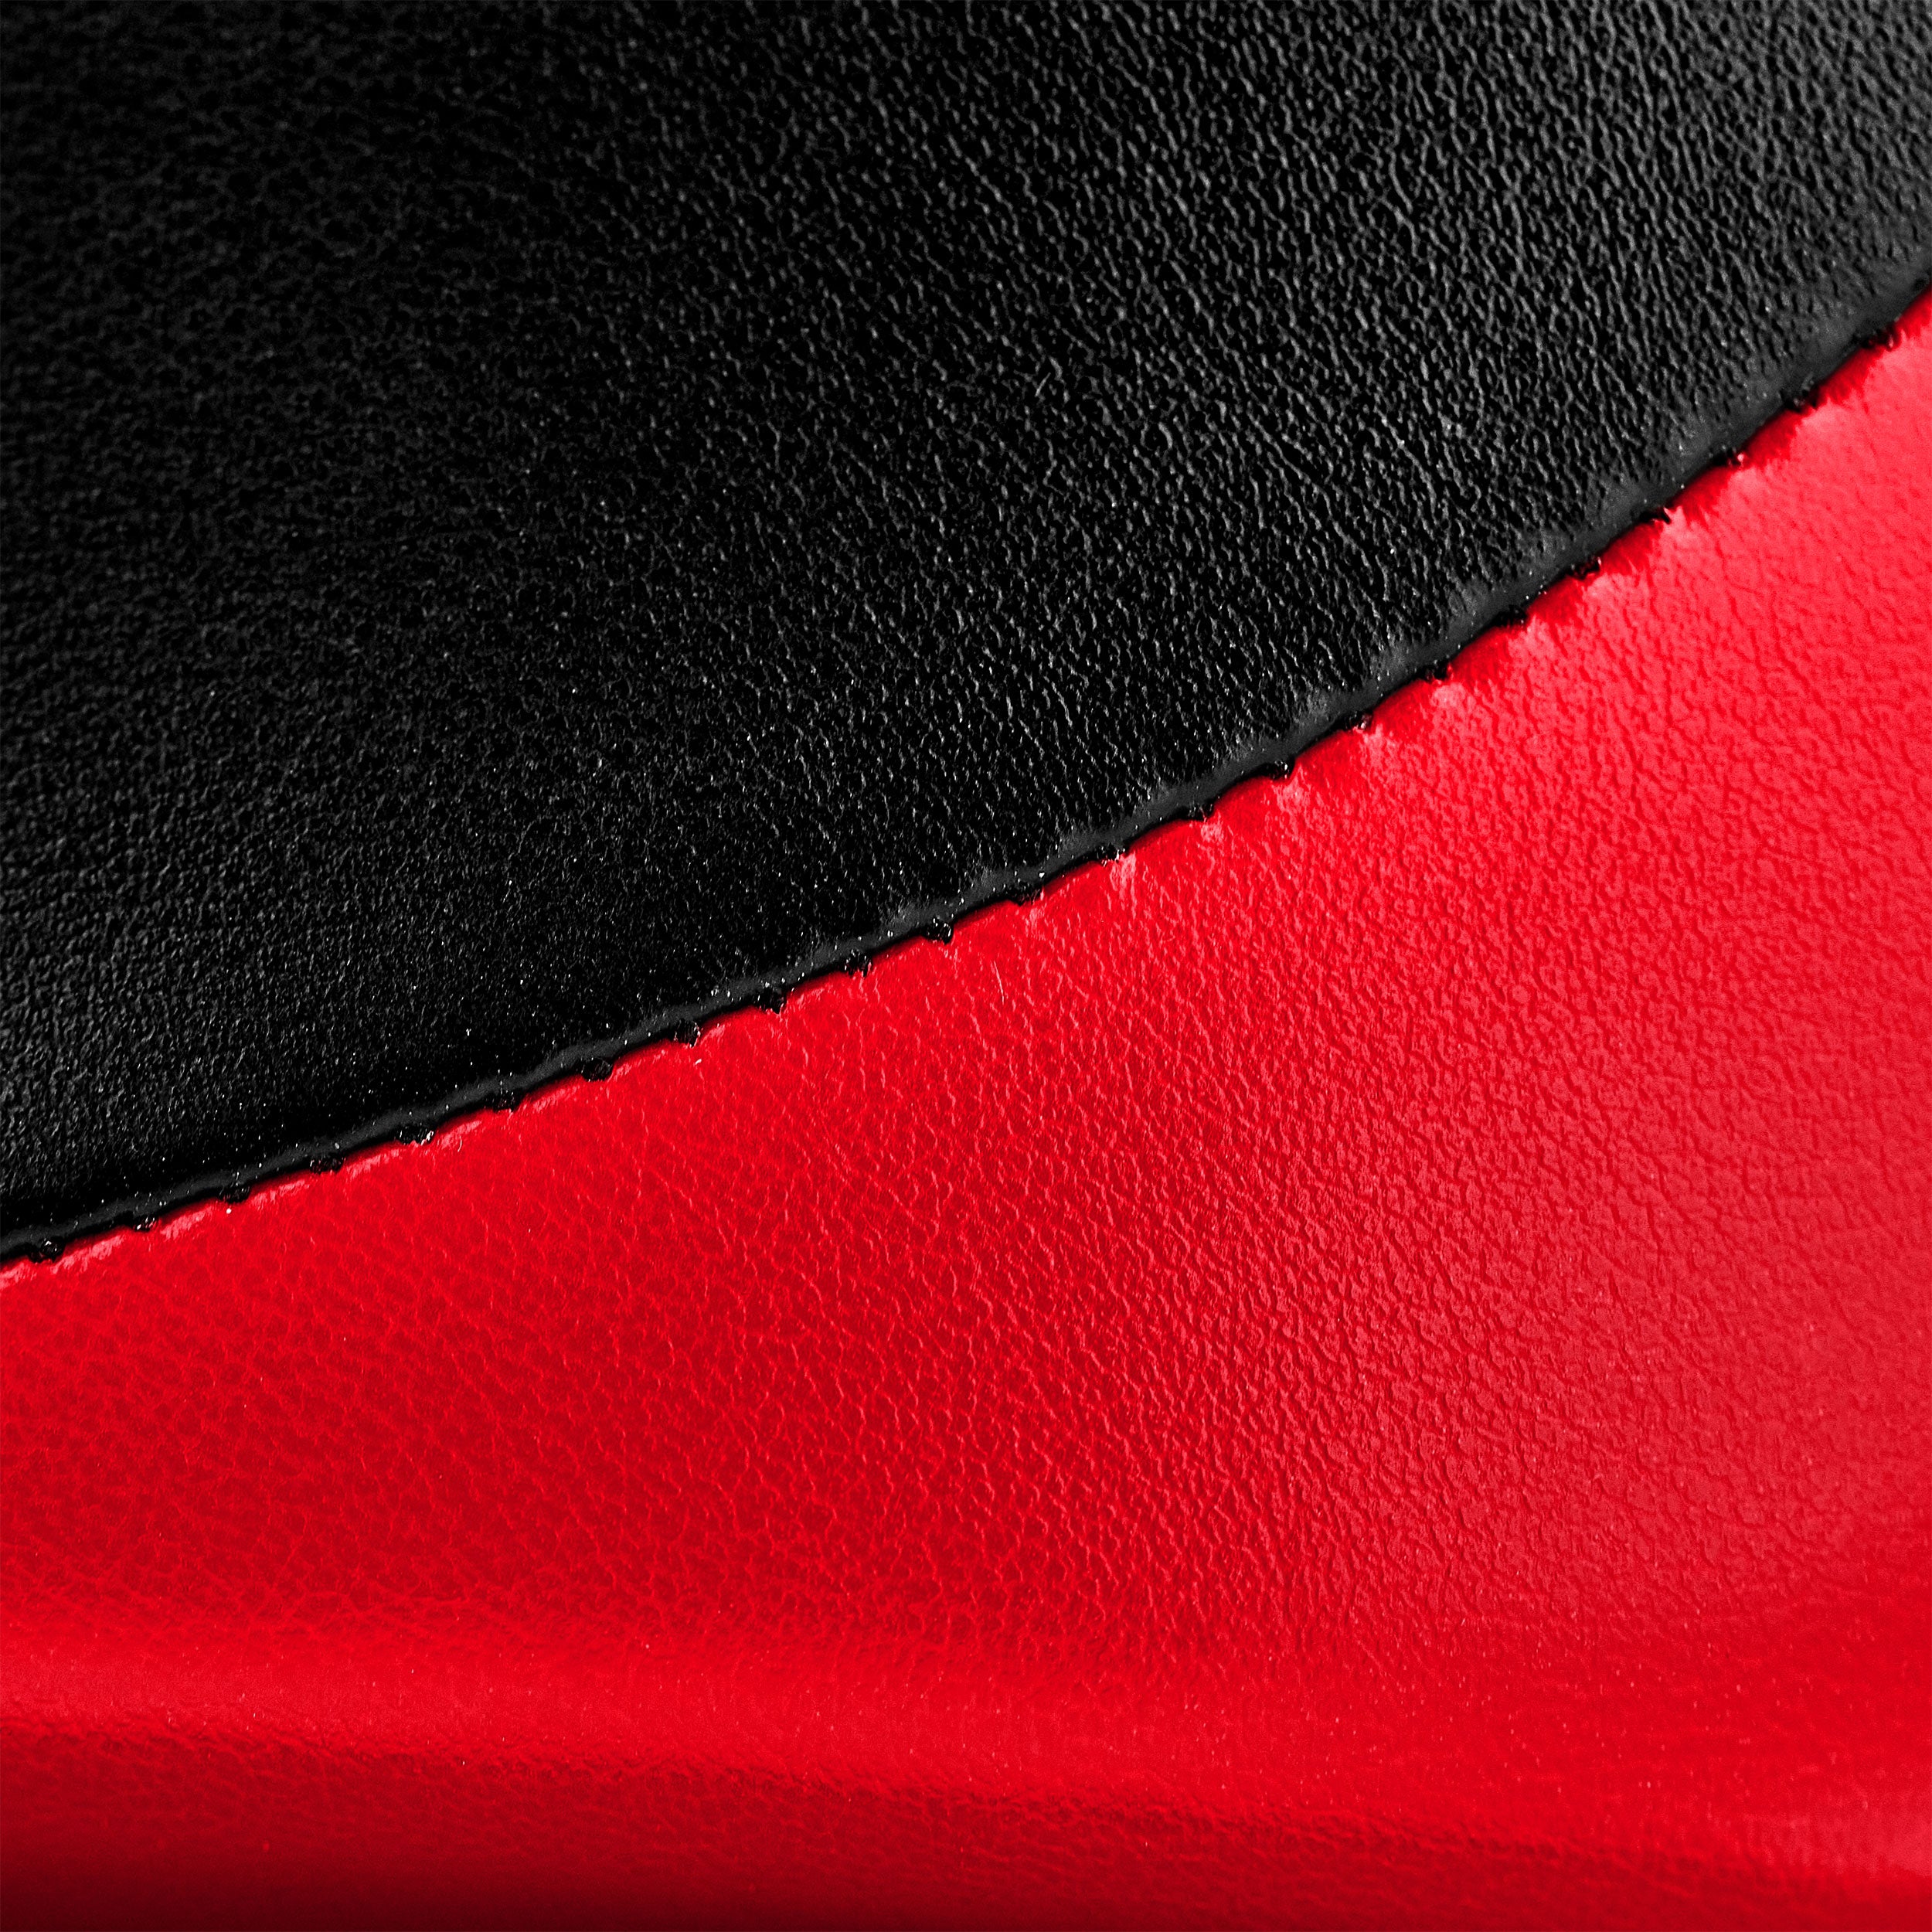 synthetic leather close up